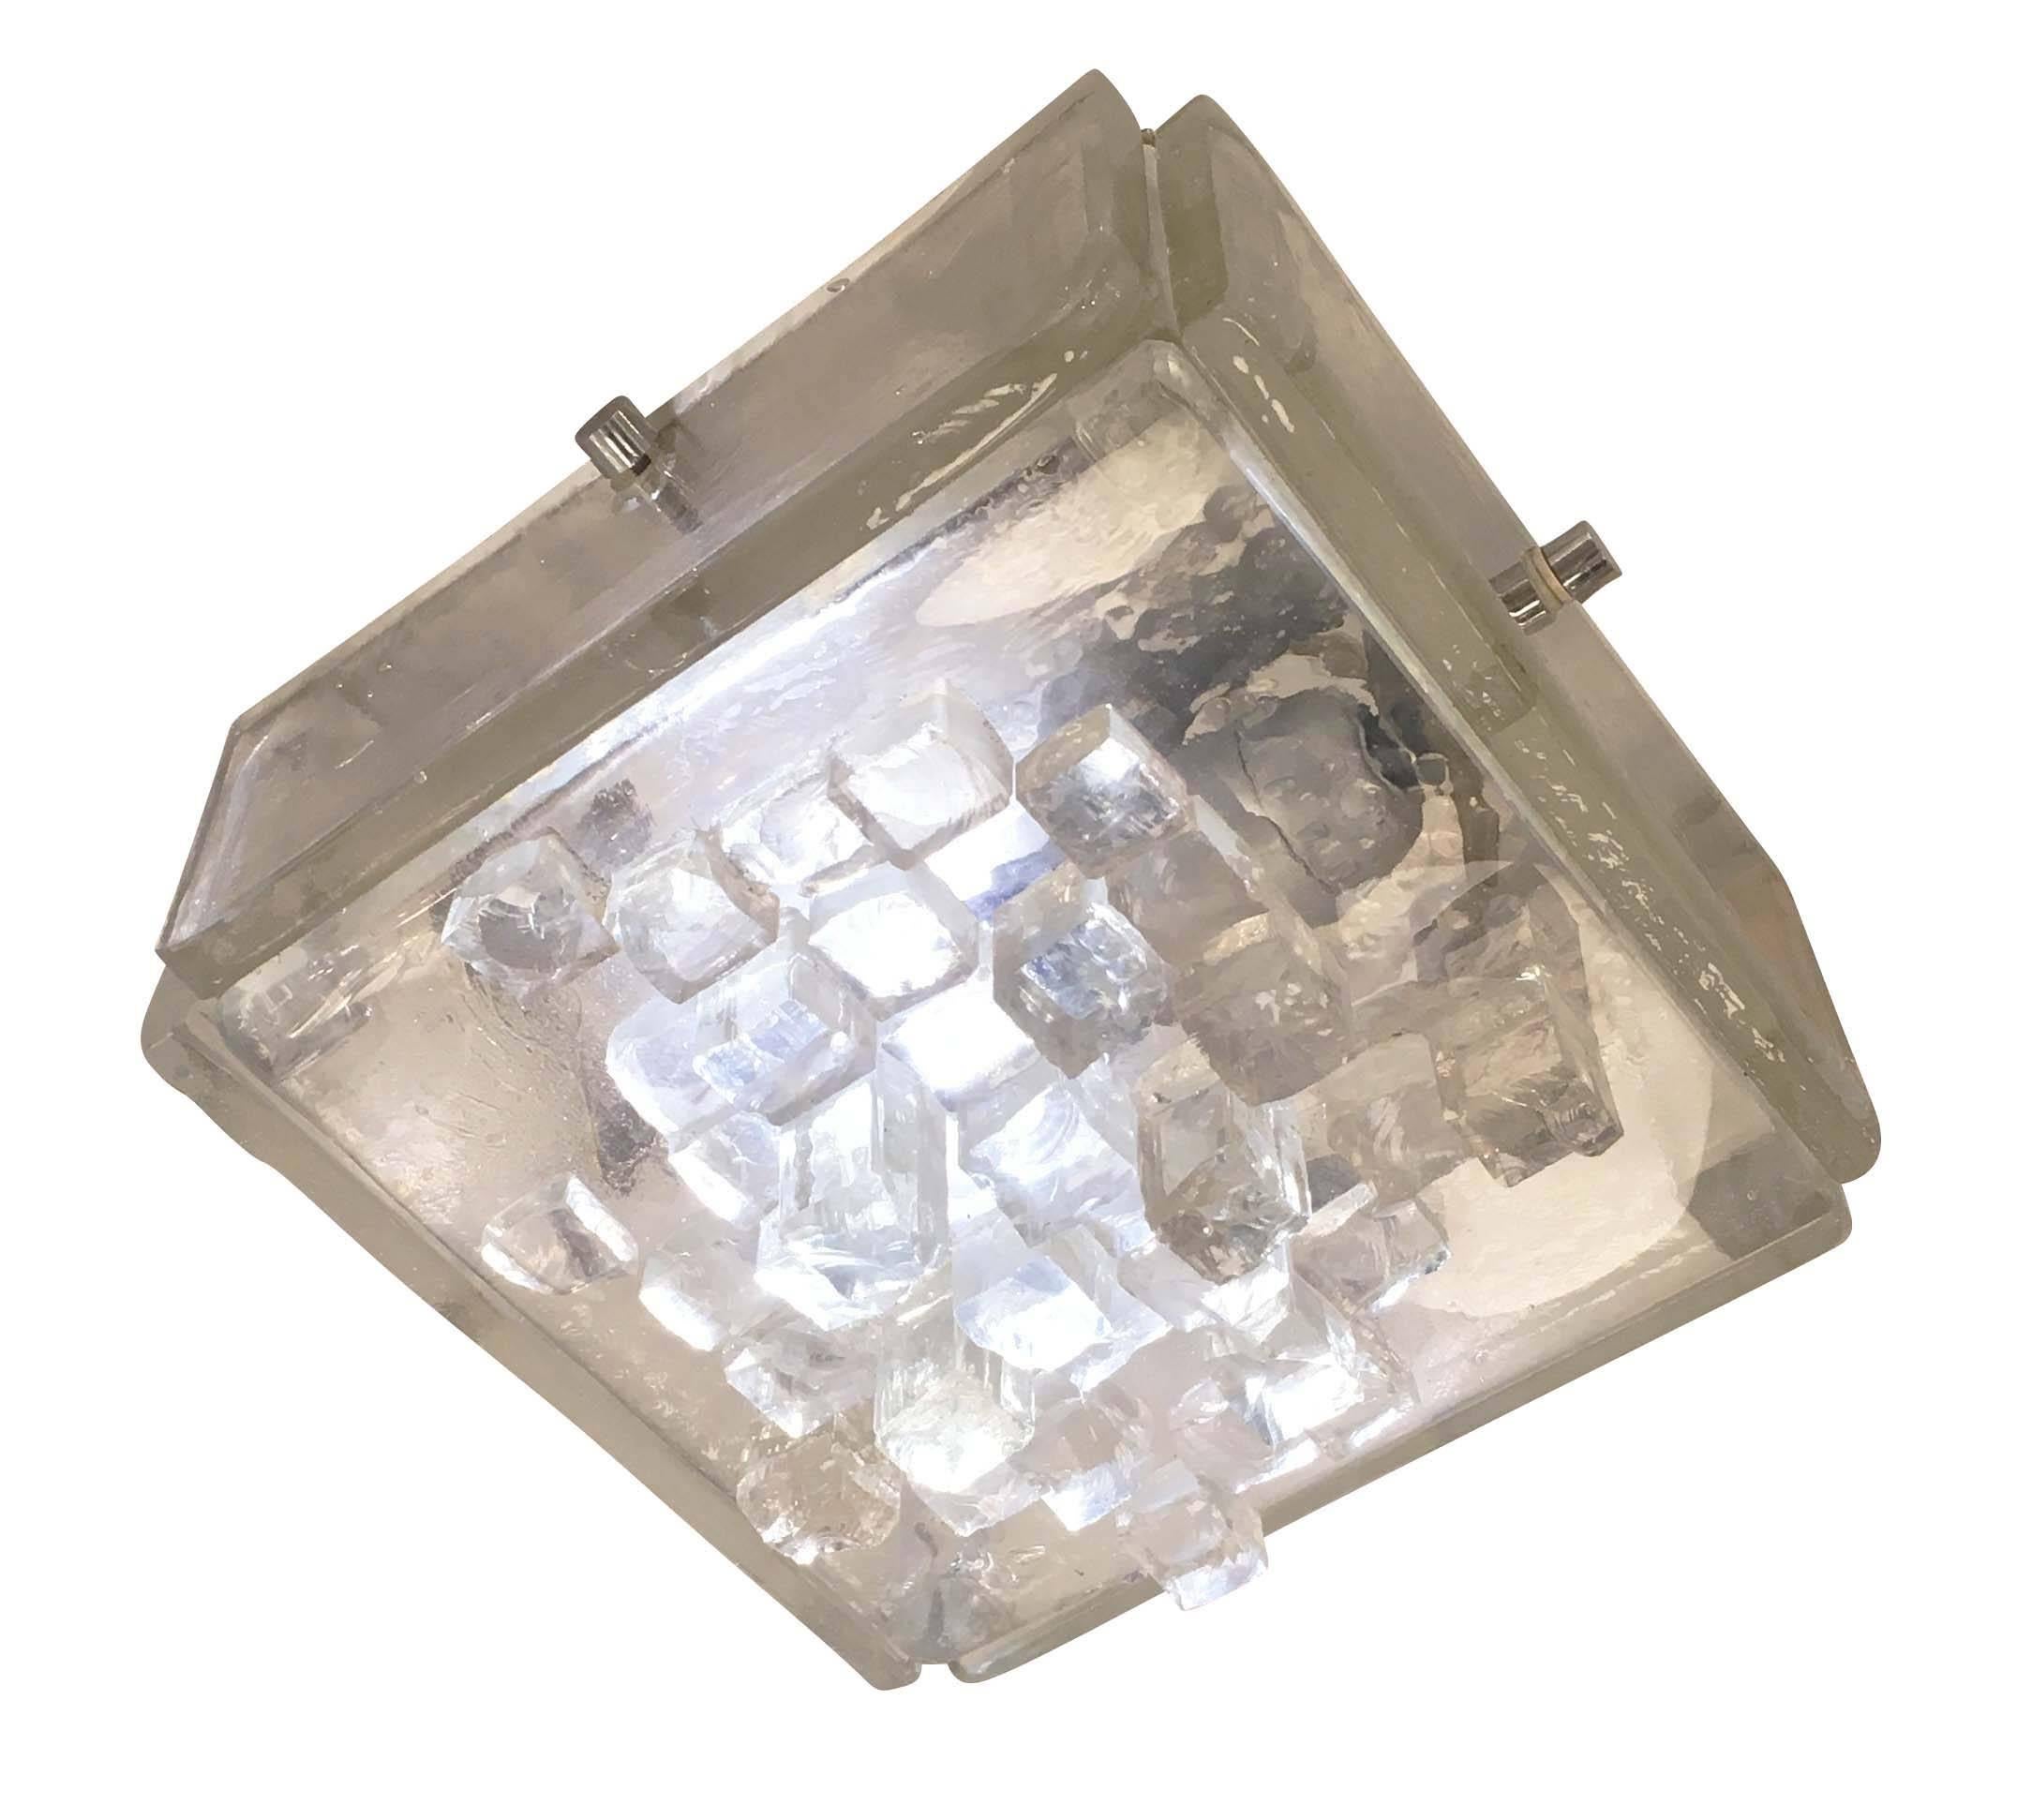 Square Murano glass fixture made by Poliarte in the 1960s that can be used as either wall light or ceiling flush mount. It's made of five thick glass slabs with the larger one being decorated with small glass cubes of different sizes. Holds one